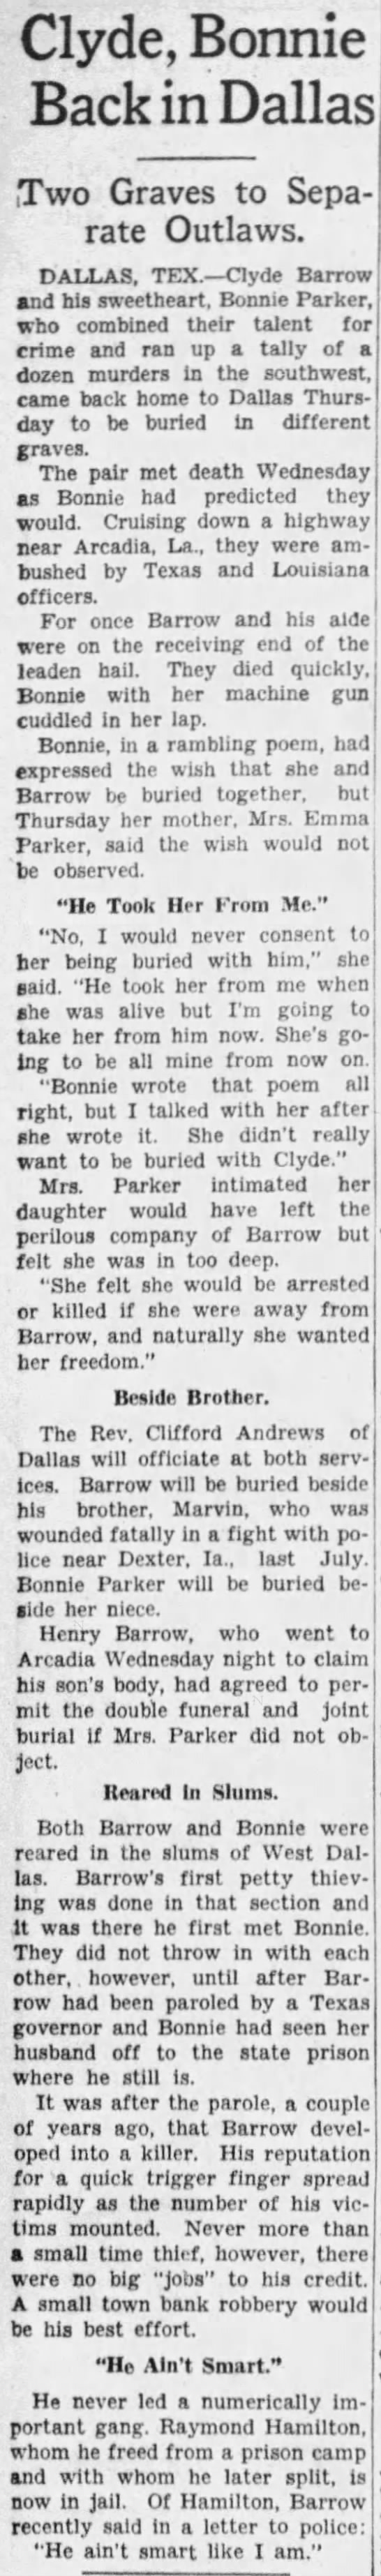 Bonnie and Clyde to be buried separately in Dallas, per the wishes of Bonnie's mother - 